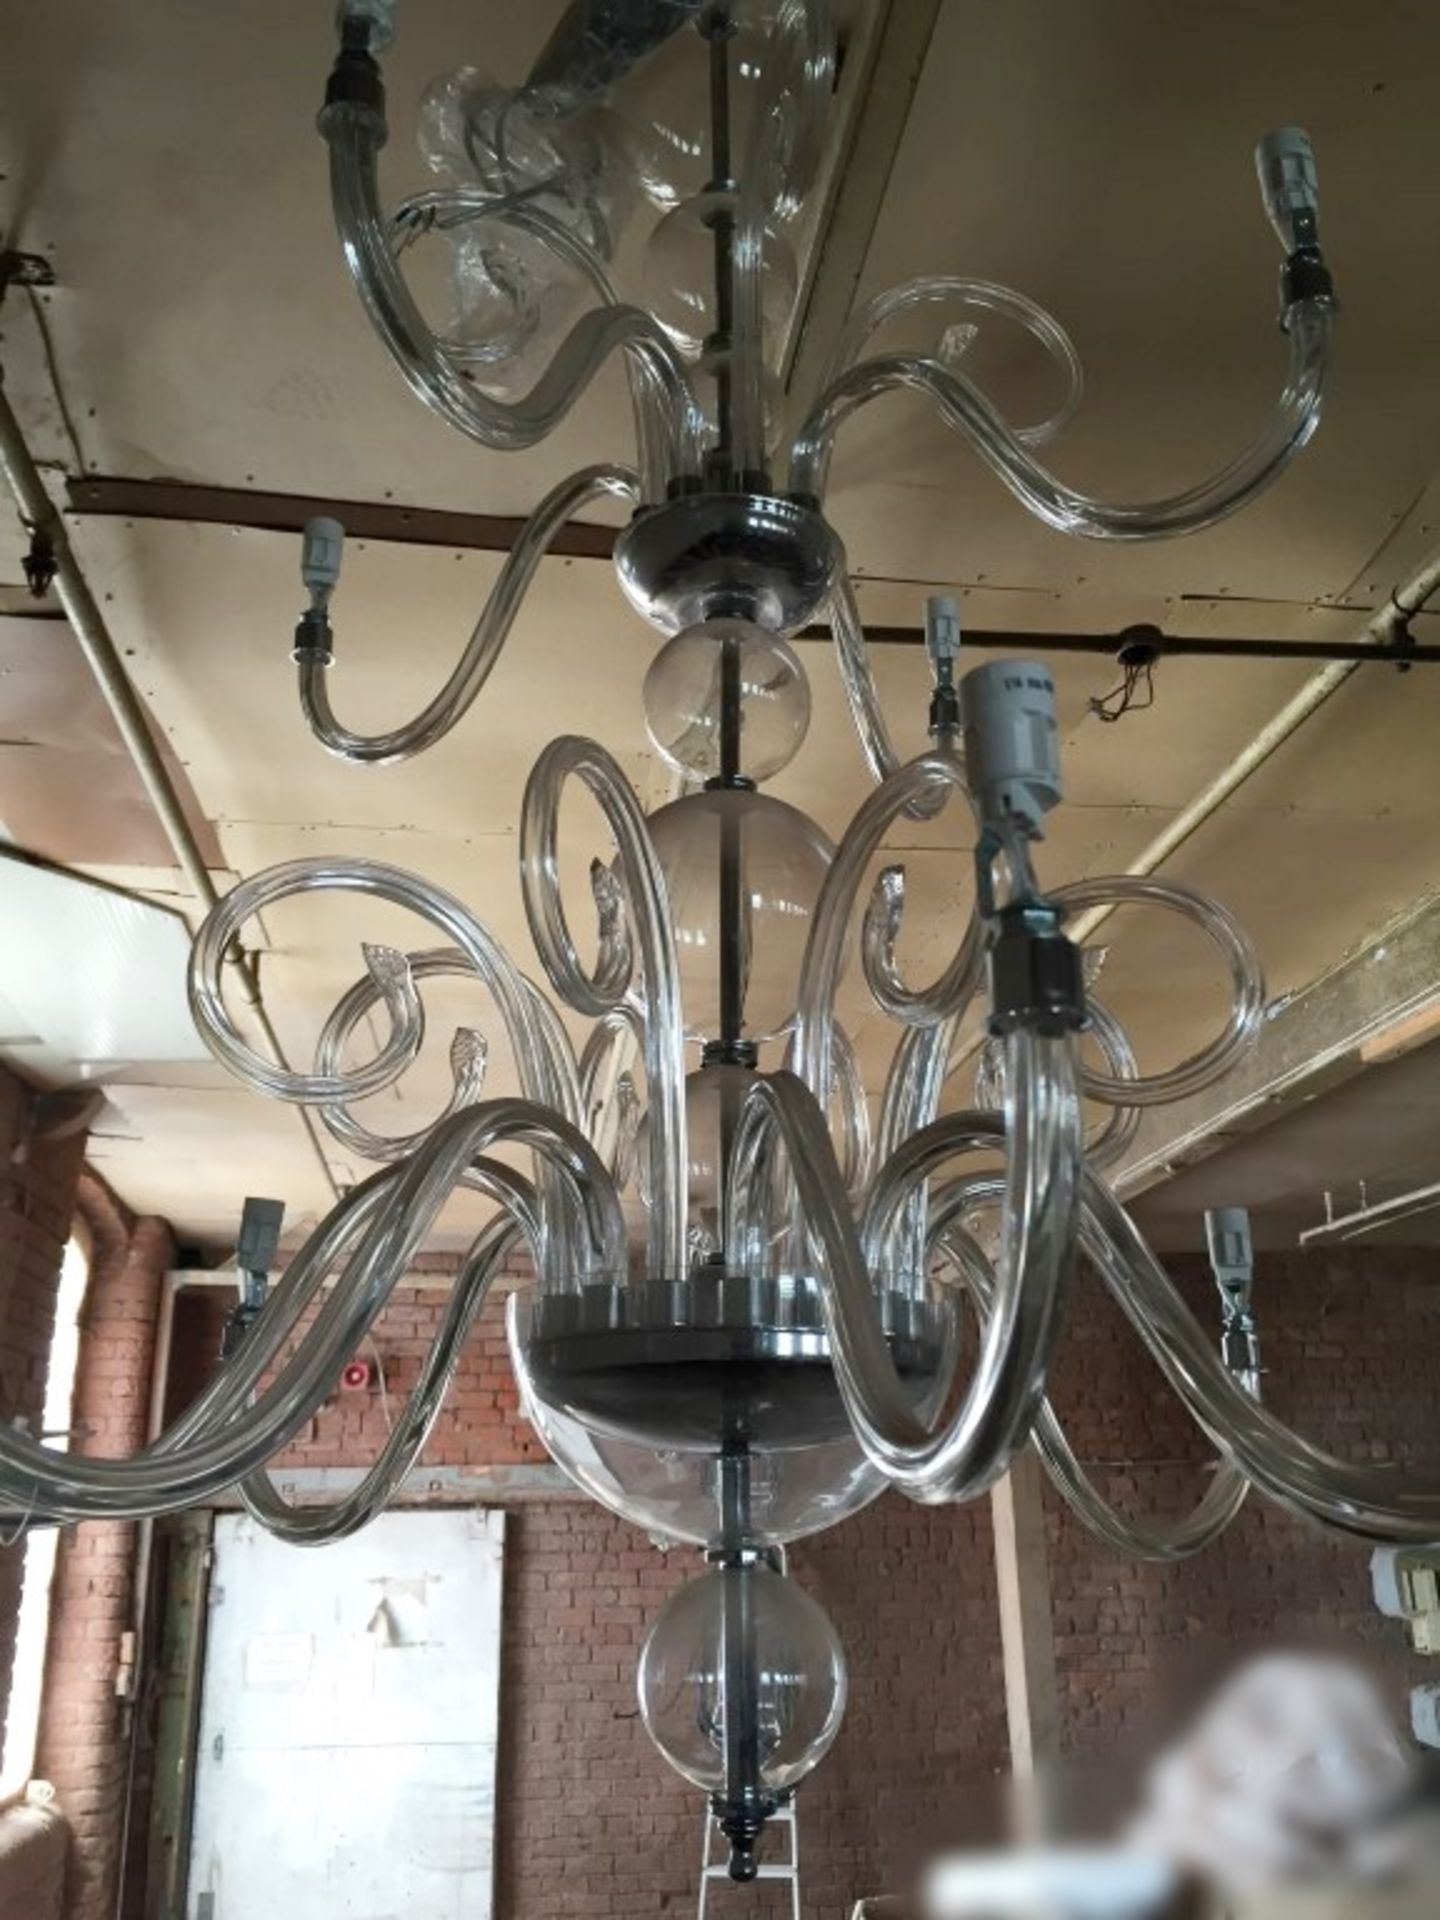 1 x Large, Ornate Chandelier-style Light Fitting - Dimensions To Follow - Ref: NDE084 - CL122 - - Image 7 of 8